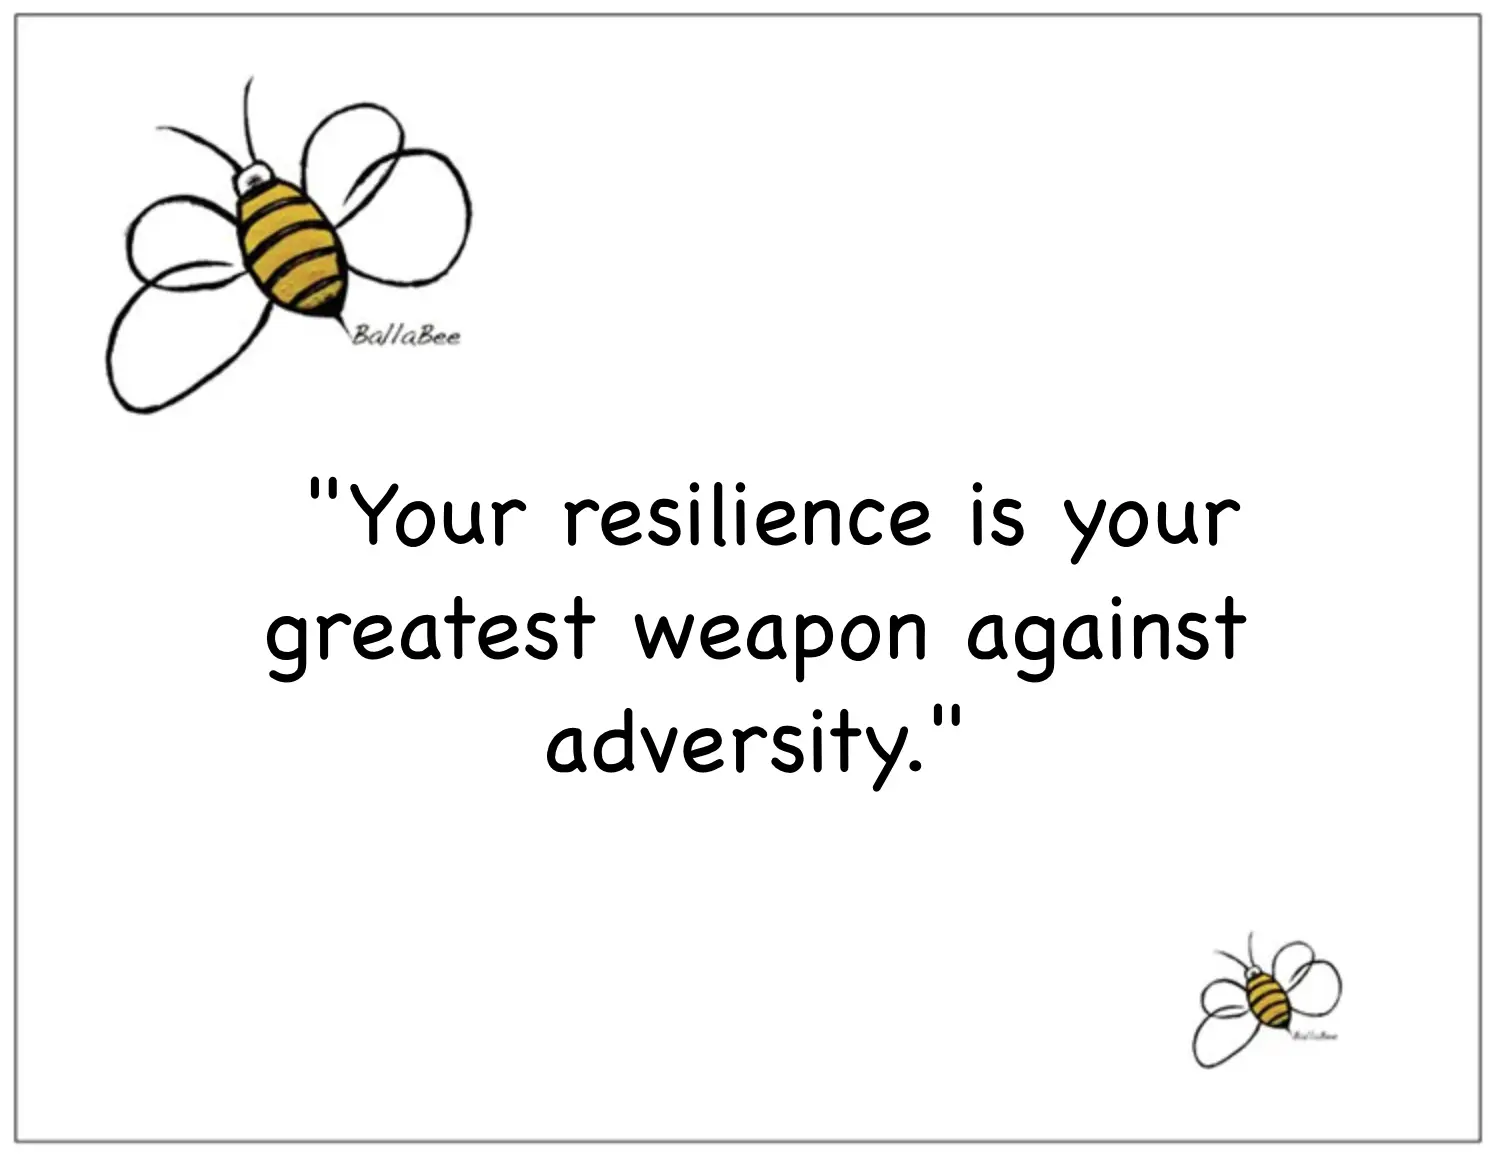 Your resilience is your greatest weapon against adversity